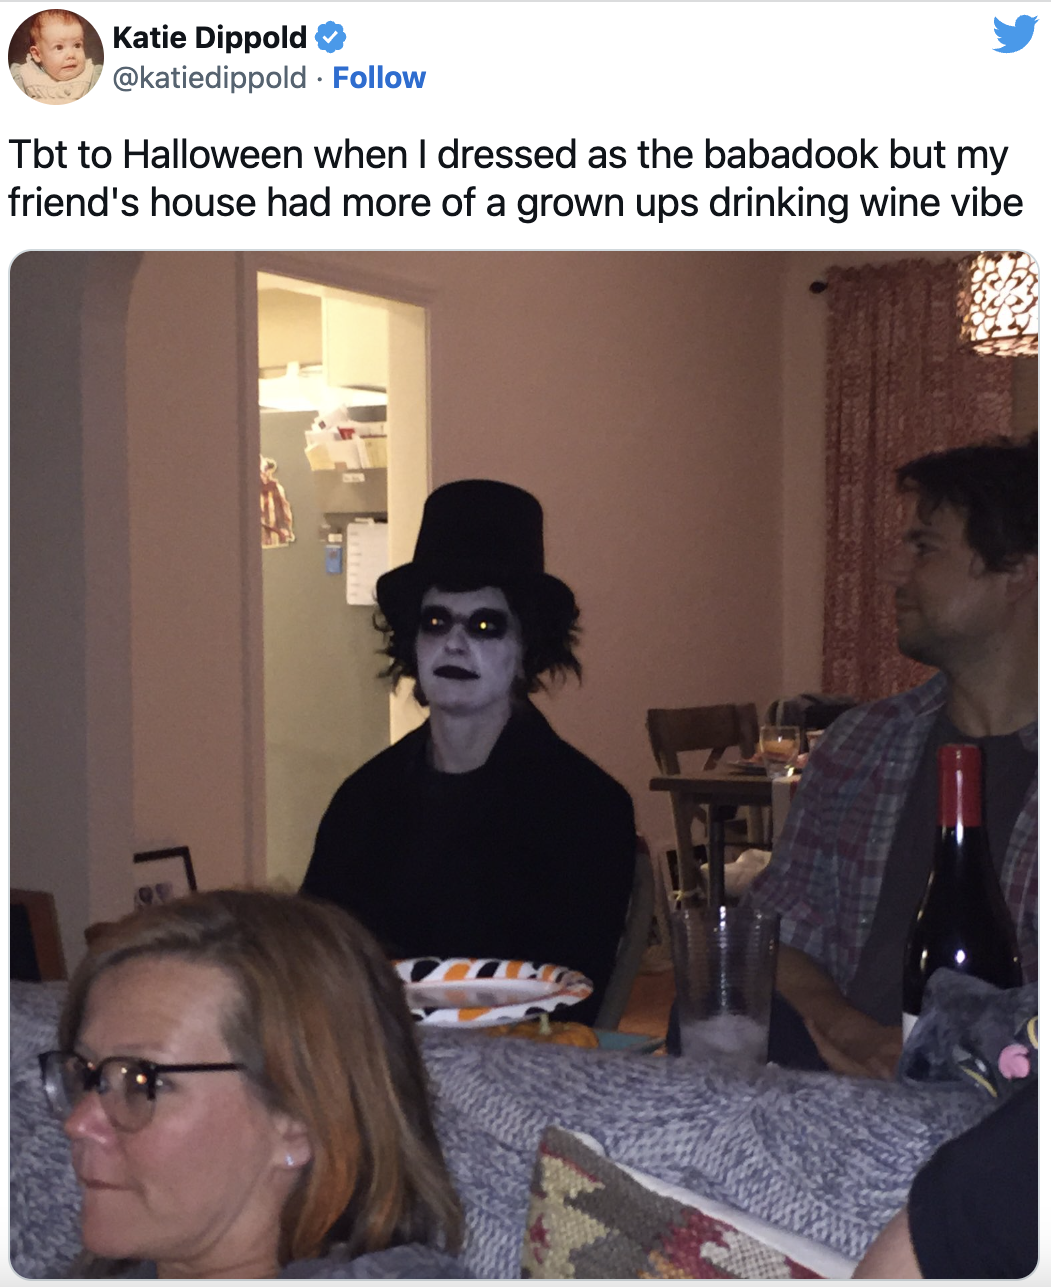 Best Tweets of All Time - conversation - Katie Dippold Tbt to Halloween when I dressed as the babadook but my friend's house had more of a grown ups drinking wine vibe